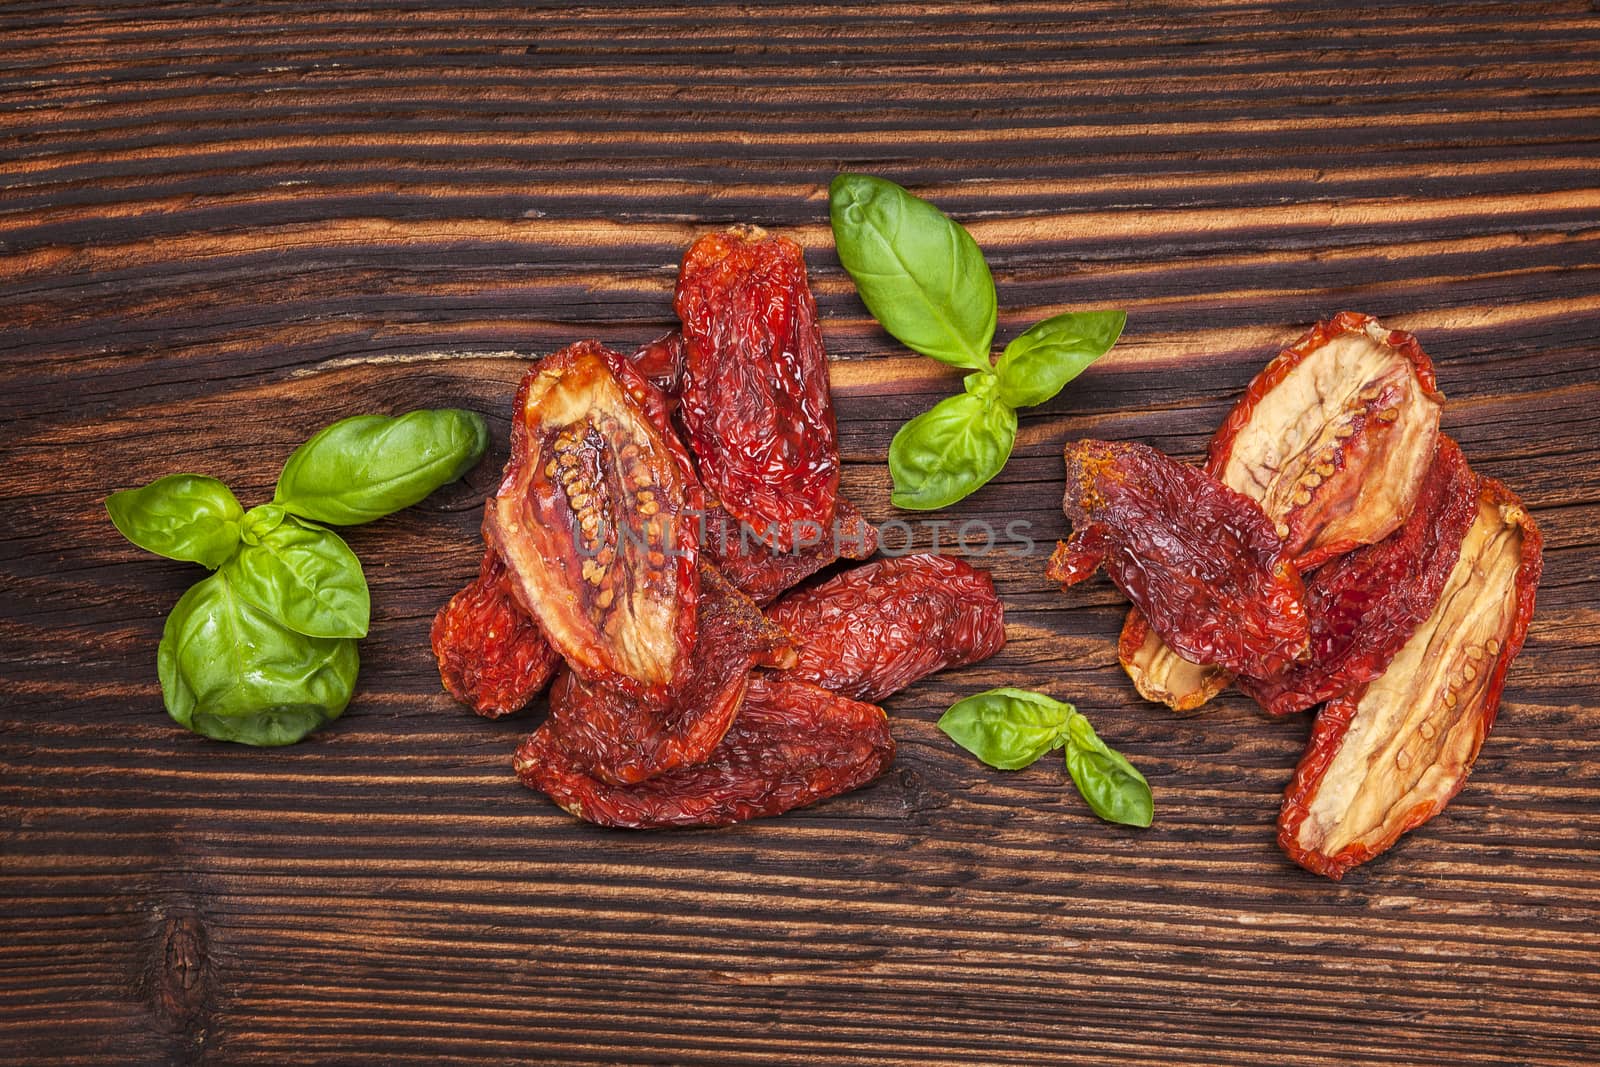 Dry tomatoes and fresh basil leaves on brown wooden background, top view. Italian eating, rustic styles.